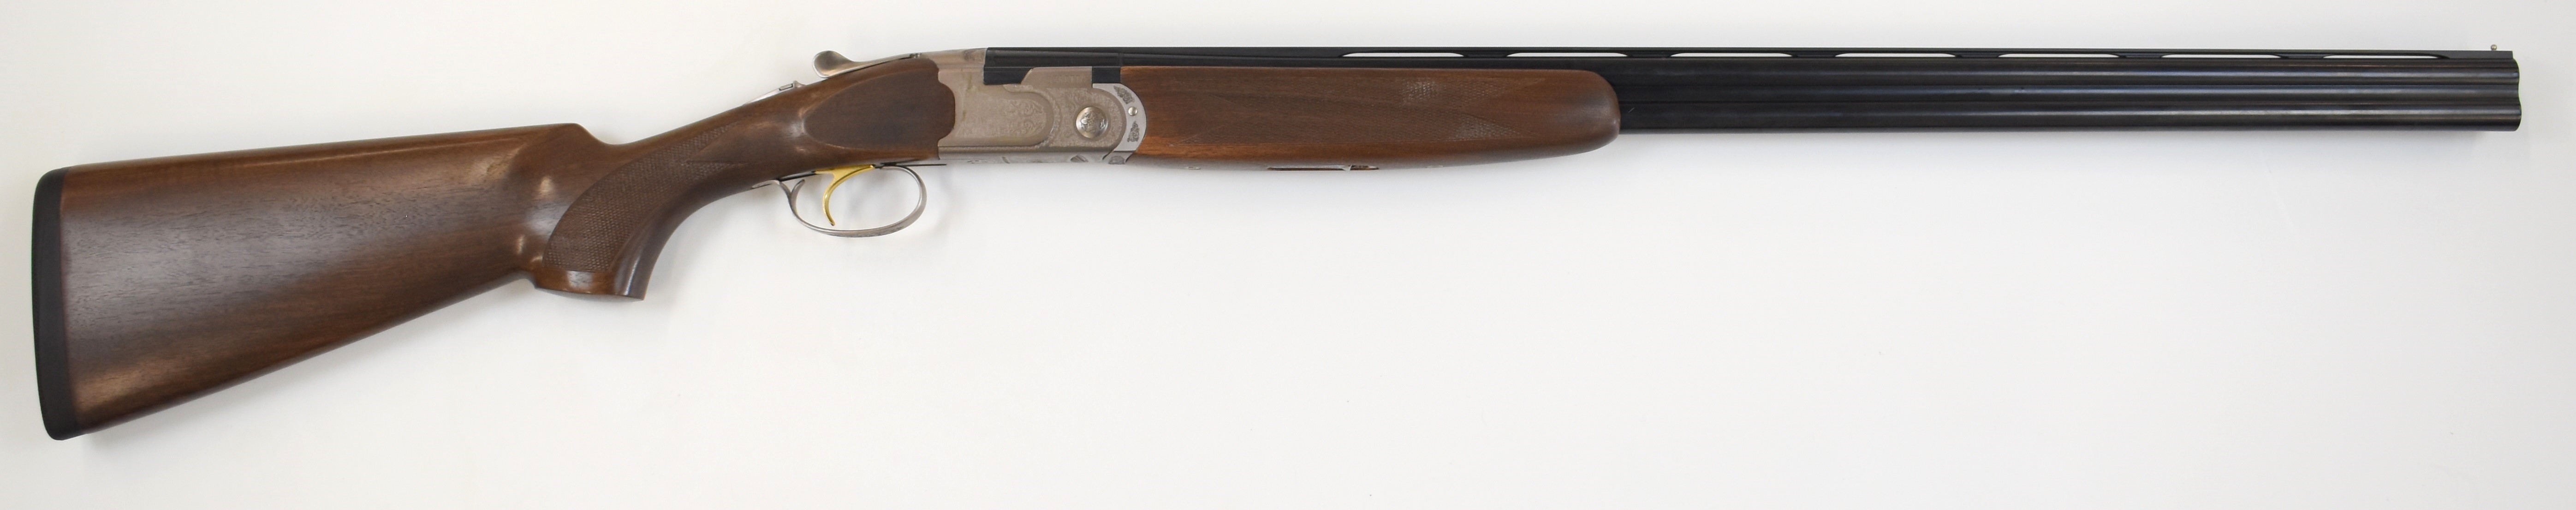 Beretta 686 Silver Pigeon I 28 bore over and under ejector shotgun with named and engraved lock - Image 16 of 28